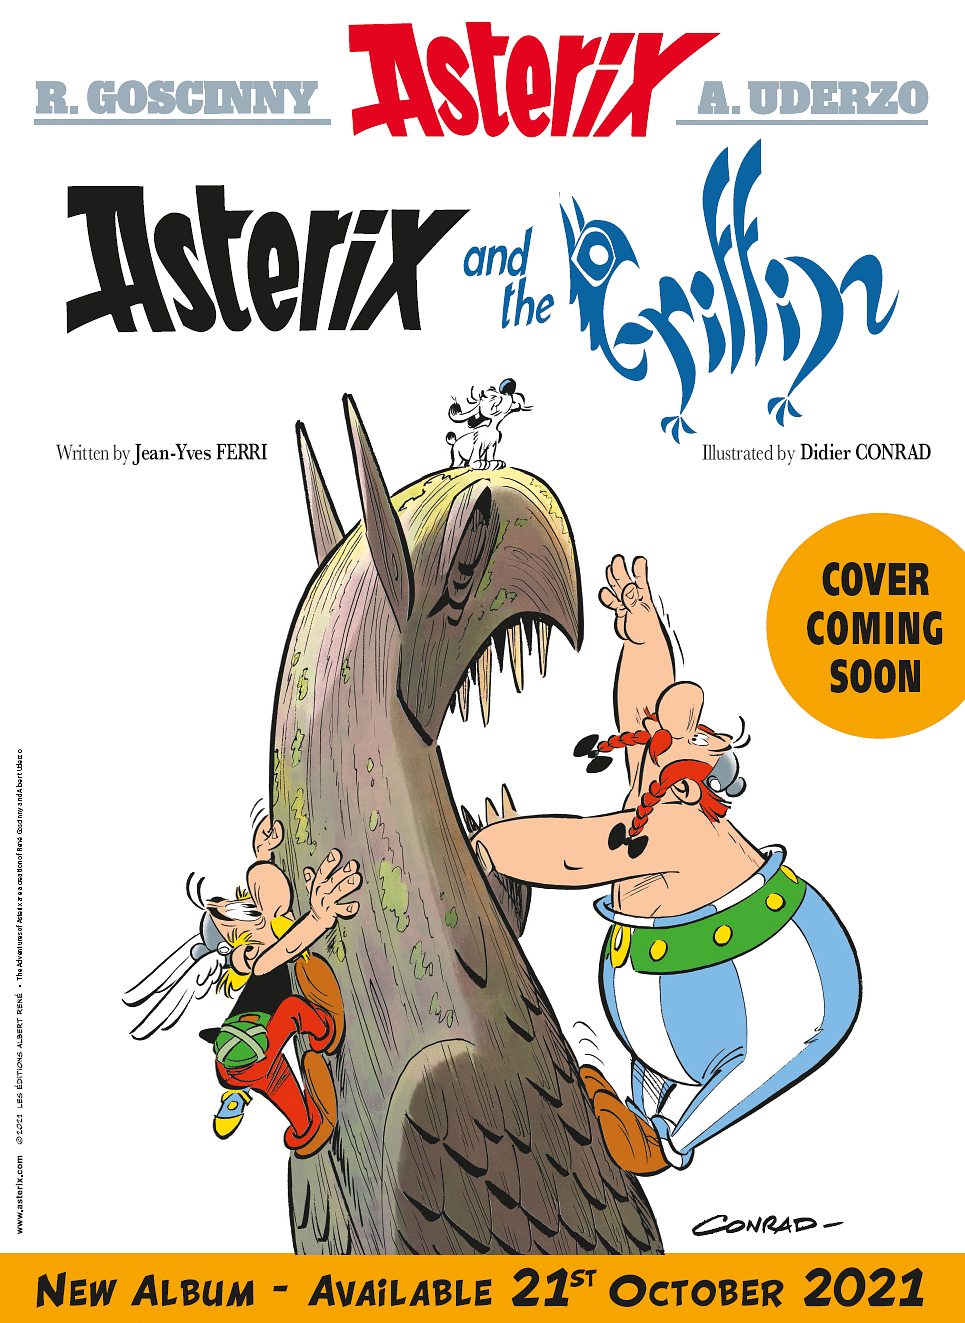 This is the first Asterix book  to be released after the death of the comic's co-creator, Albert Uderzo.